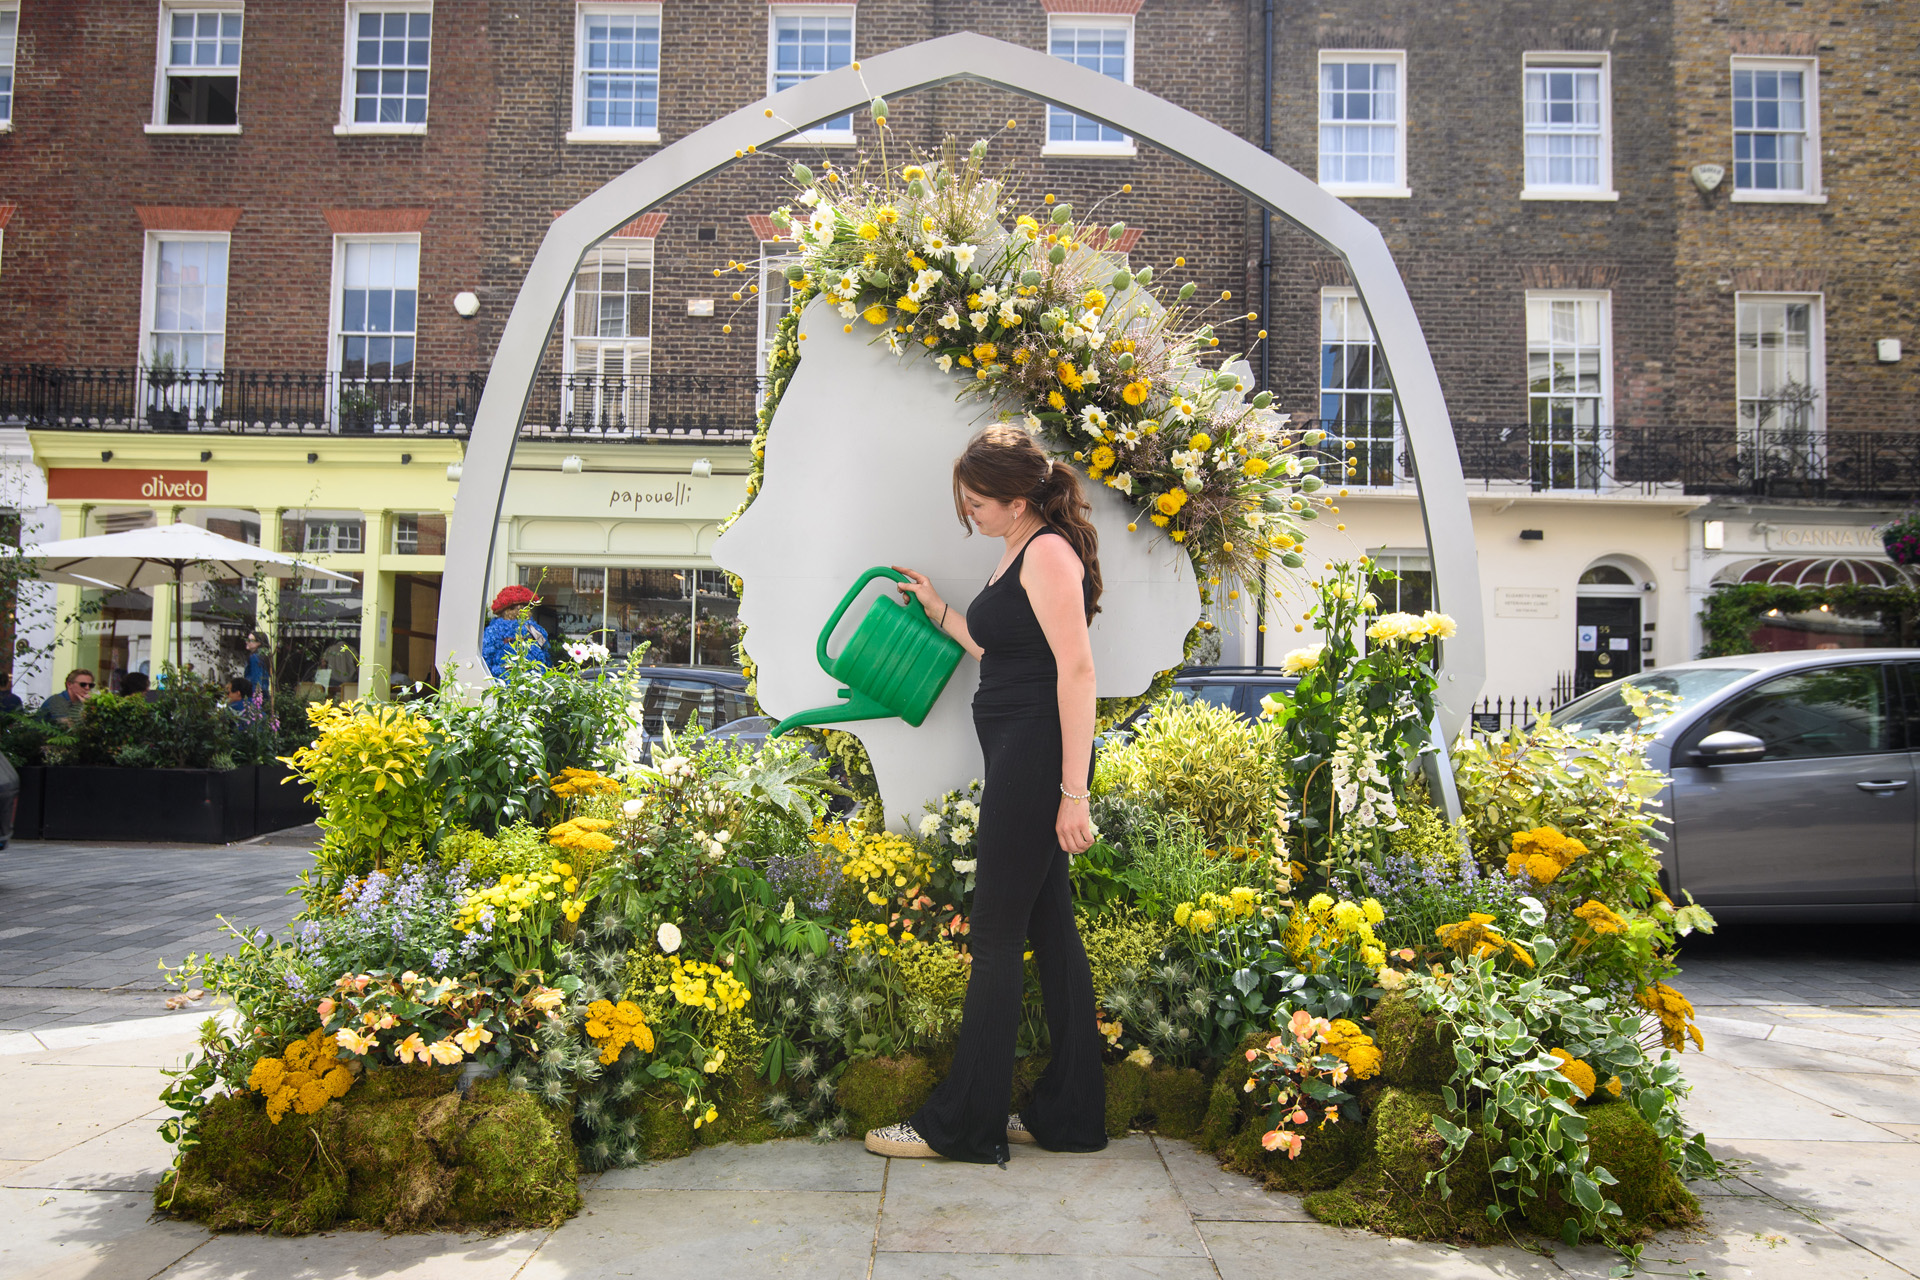 Florist Claudia Costil from Moyses Stevens puts the finishing touches to a floral installation of a 50 pence piece featuring the Queen’s Head on Elizabeth Street in London